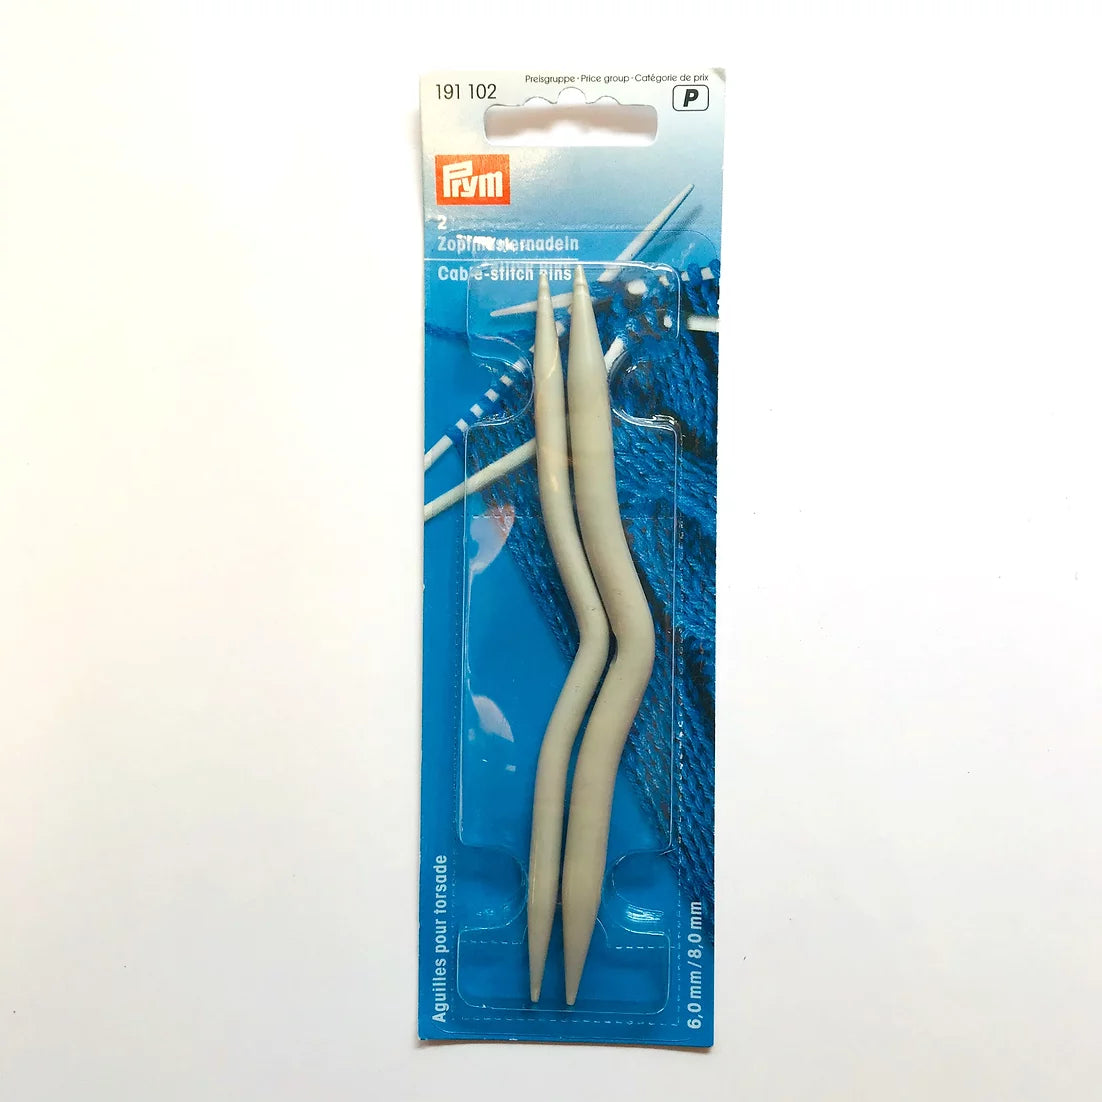 Prym Cranked Cable Needles for Knitting Size 6mm - 8mm